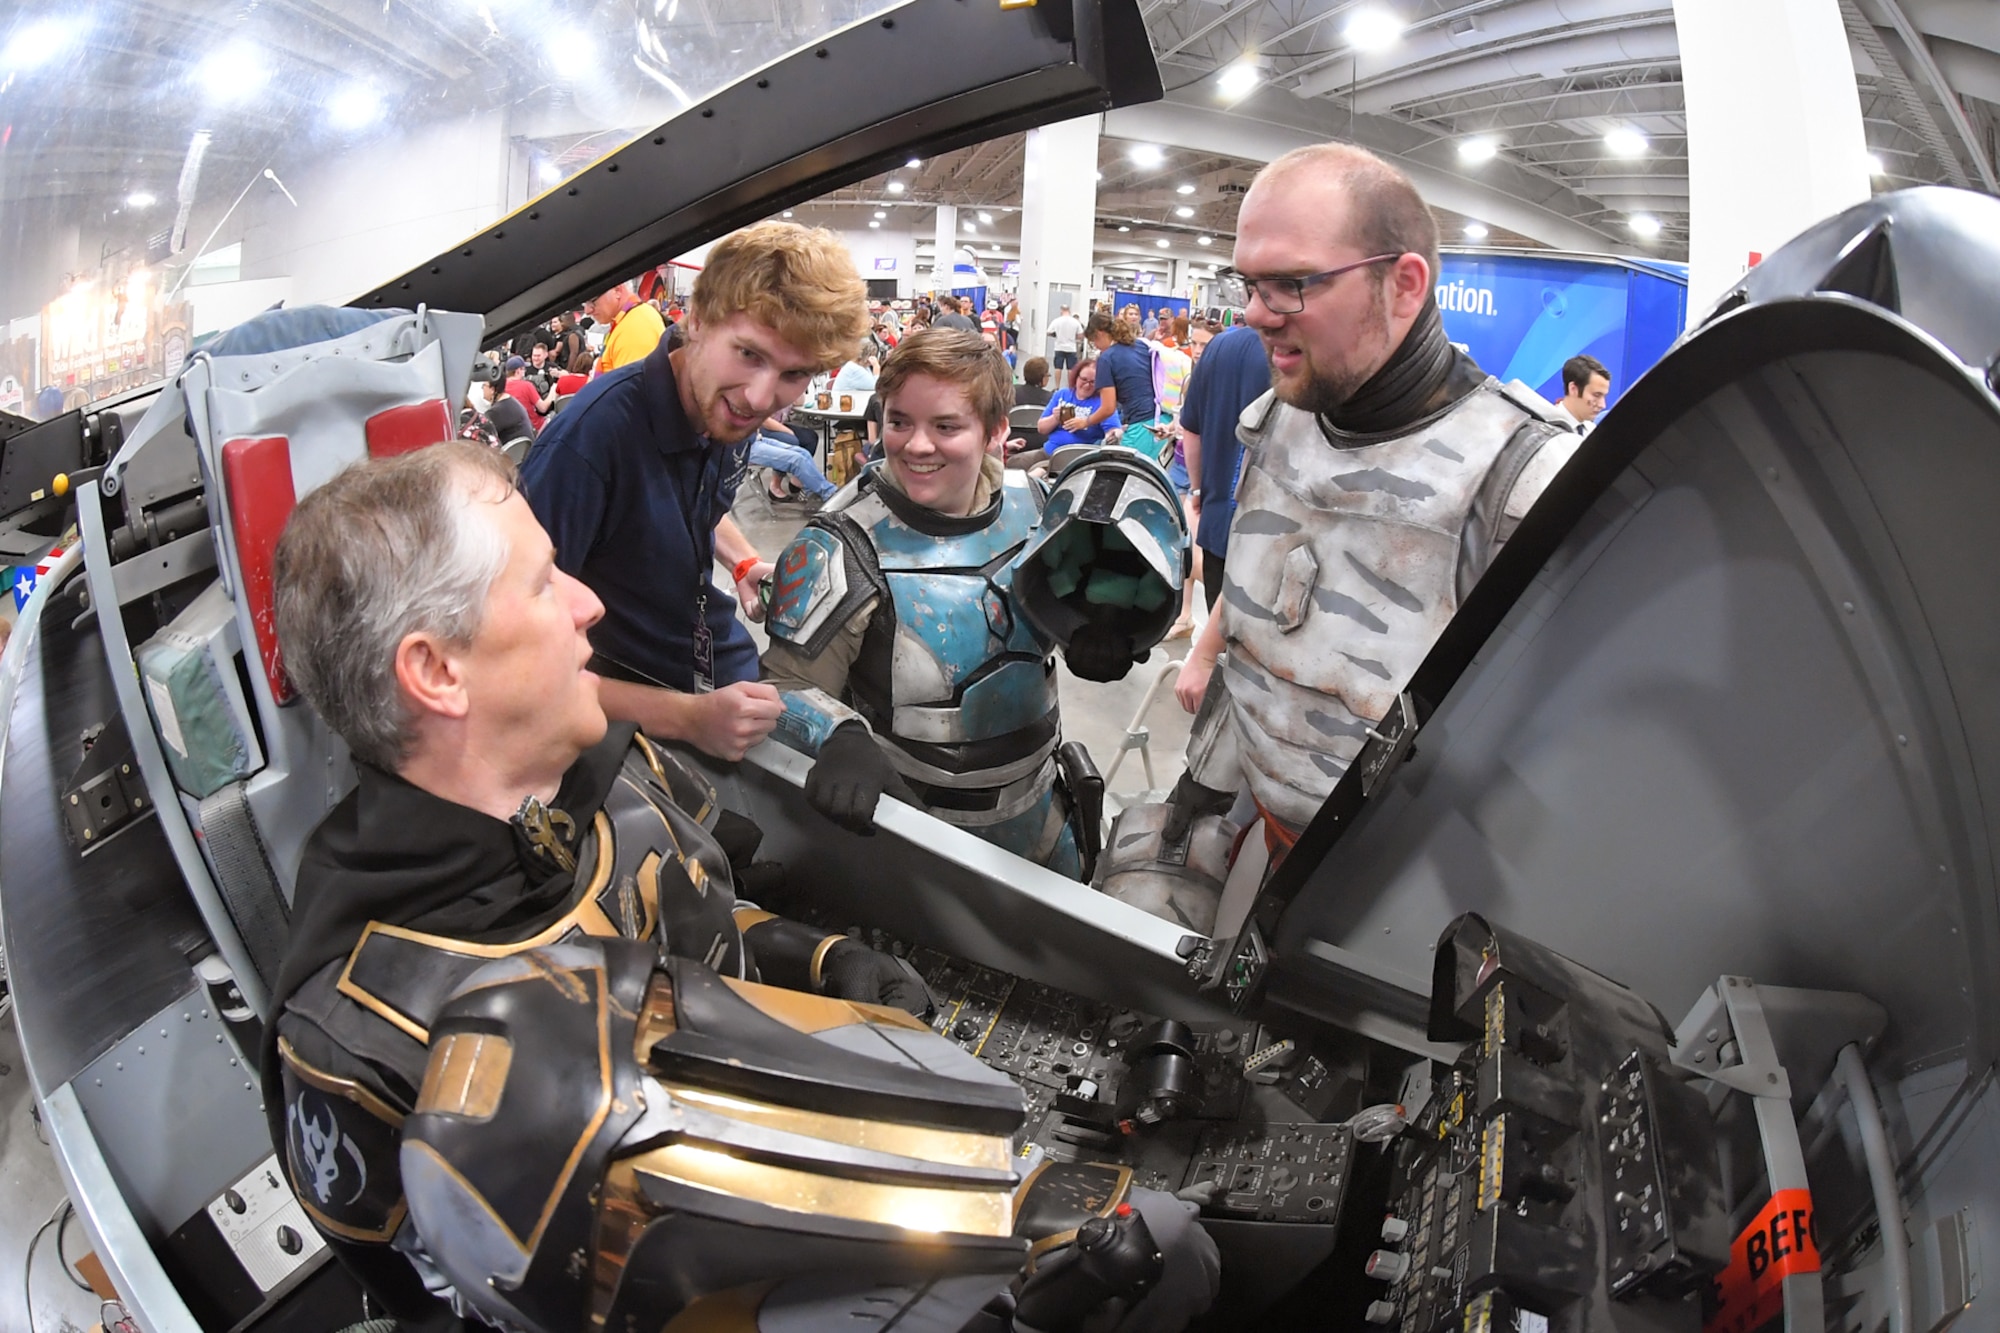 FanX visitors dressed as Star Wars characters experience an A-10 cockpit flight simulator, while talking with Matt Kirk, 518th Software Maintenance Squadron, who was volunteering at the Hill Air Force Base STEM Outreach booth, Sept. 7, 2018, Salt Lake City.